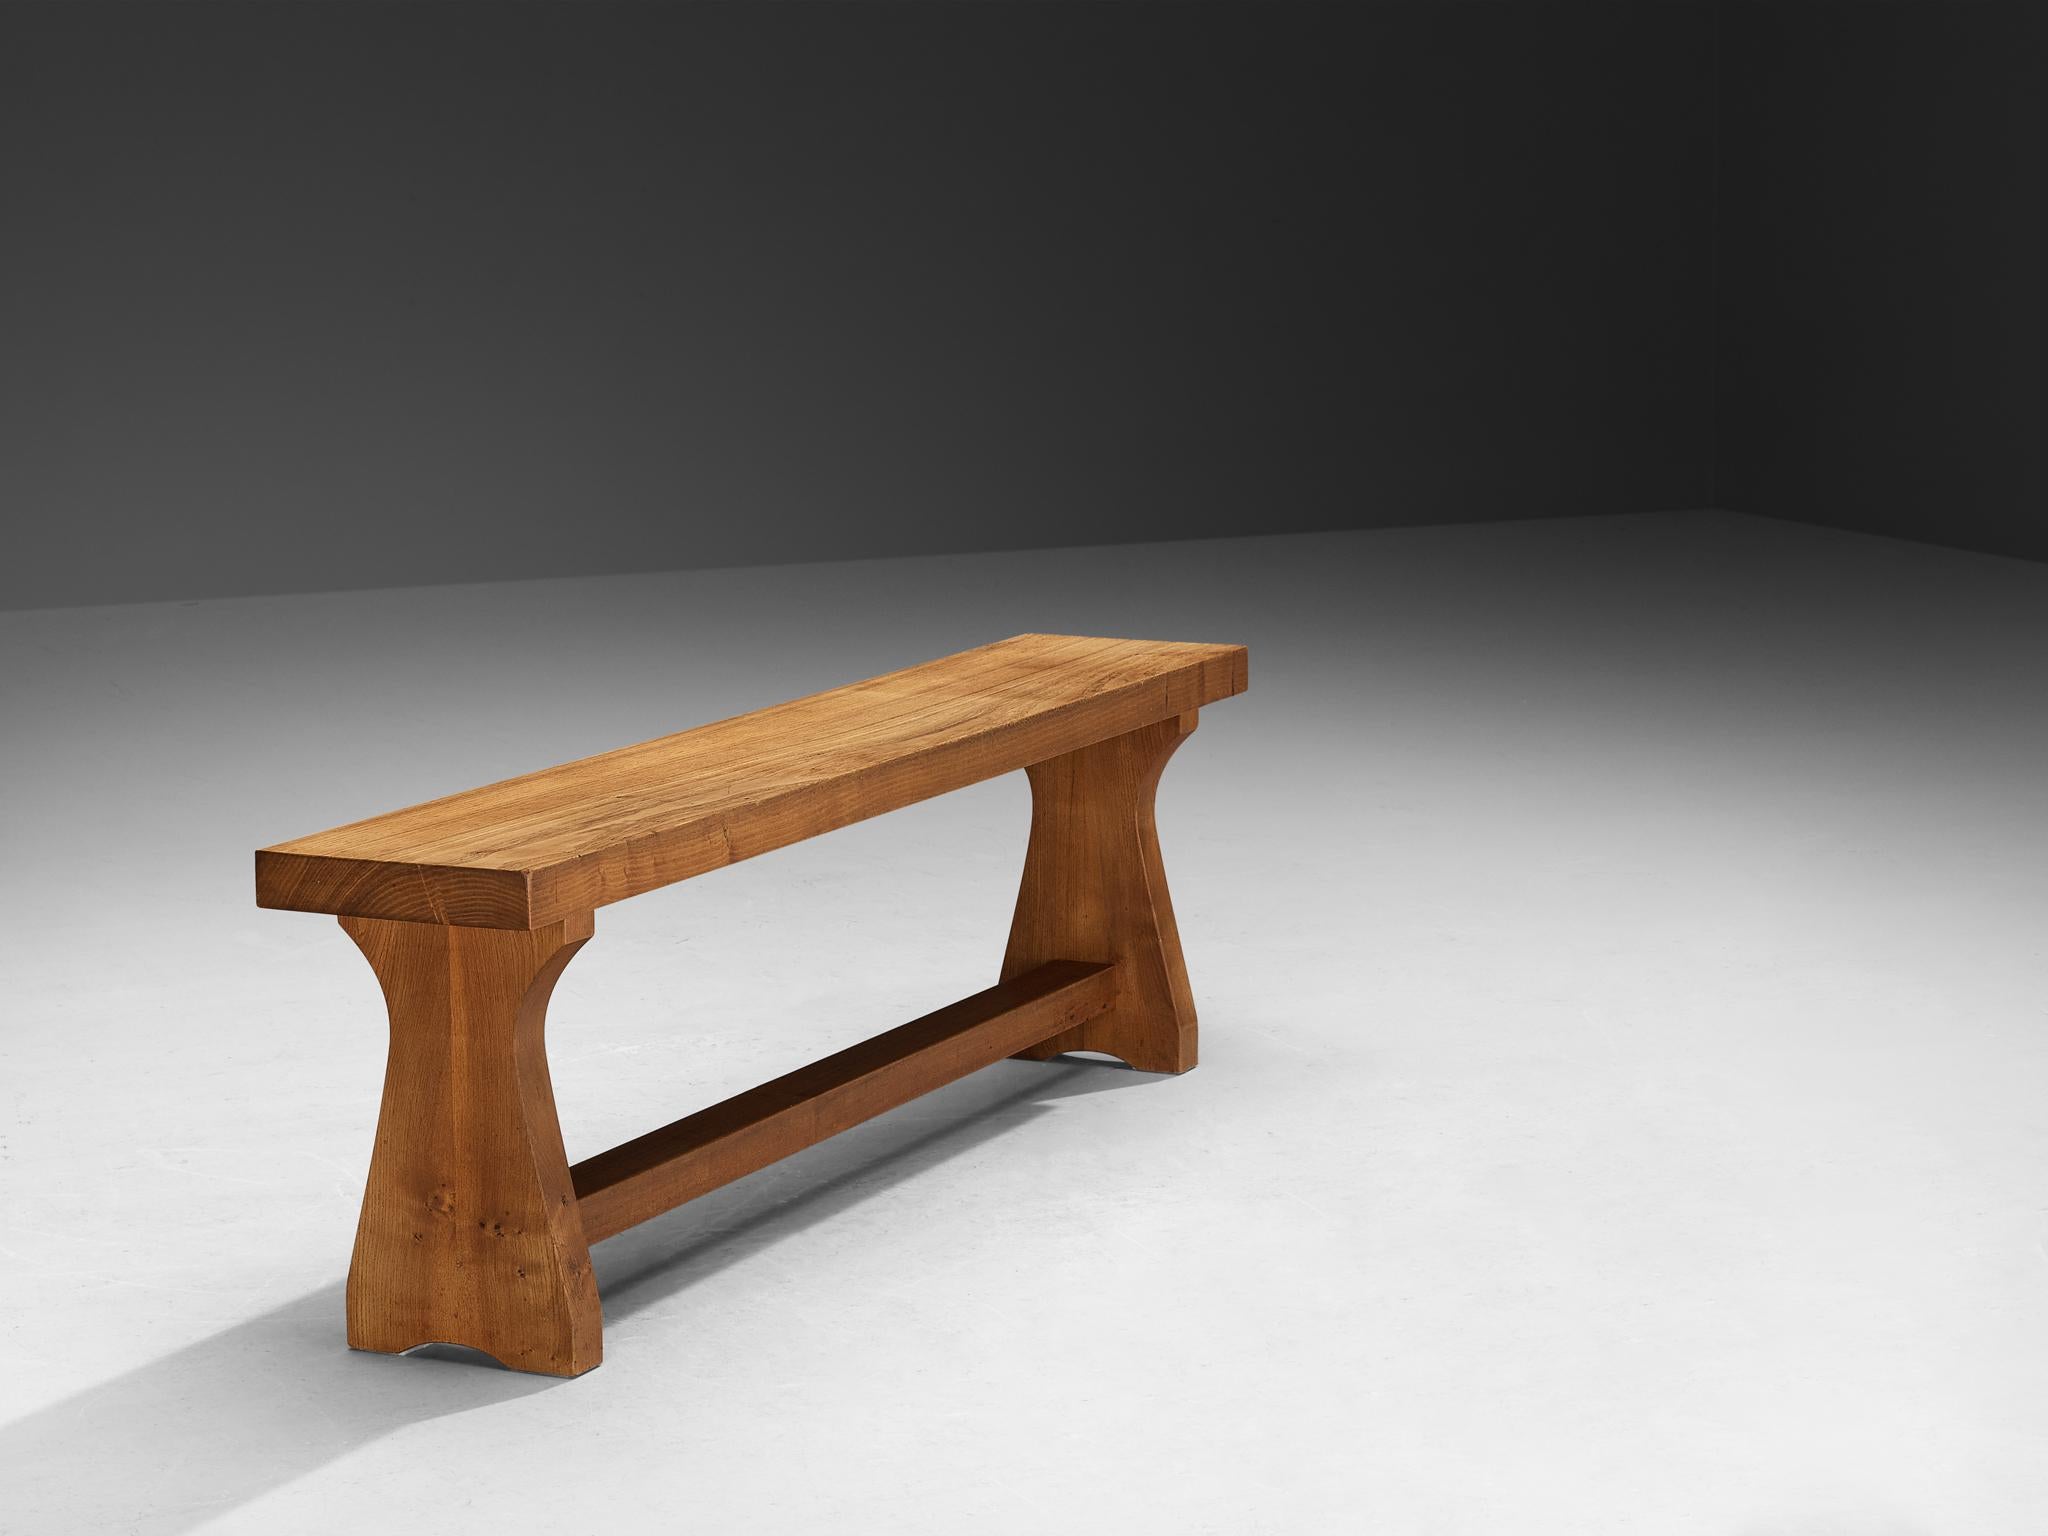 Atelier C. Demoyen, bench, solid elm, France, 1970s

Atelier C. Demoyen (Claude de Moyen) gained prominence as a workshop recognized for crafting, among others, Pierre Chapo's designs. Consequently, their own furniture creations bear the hallmark of